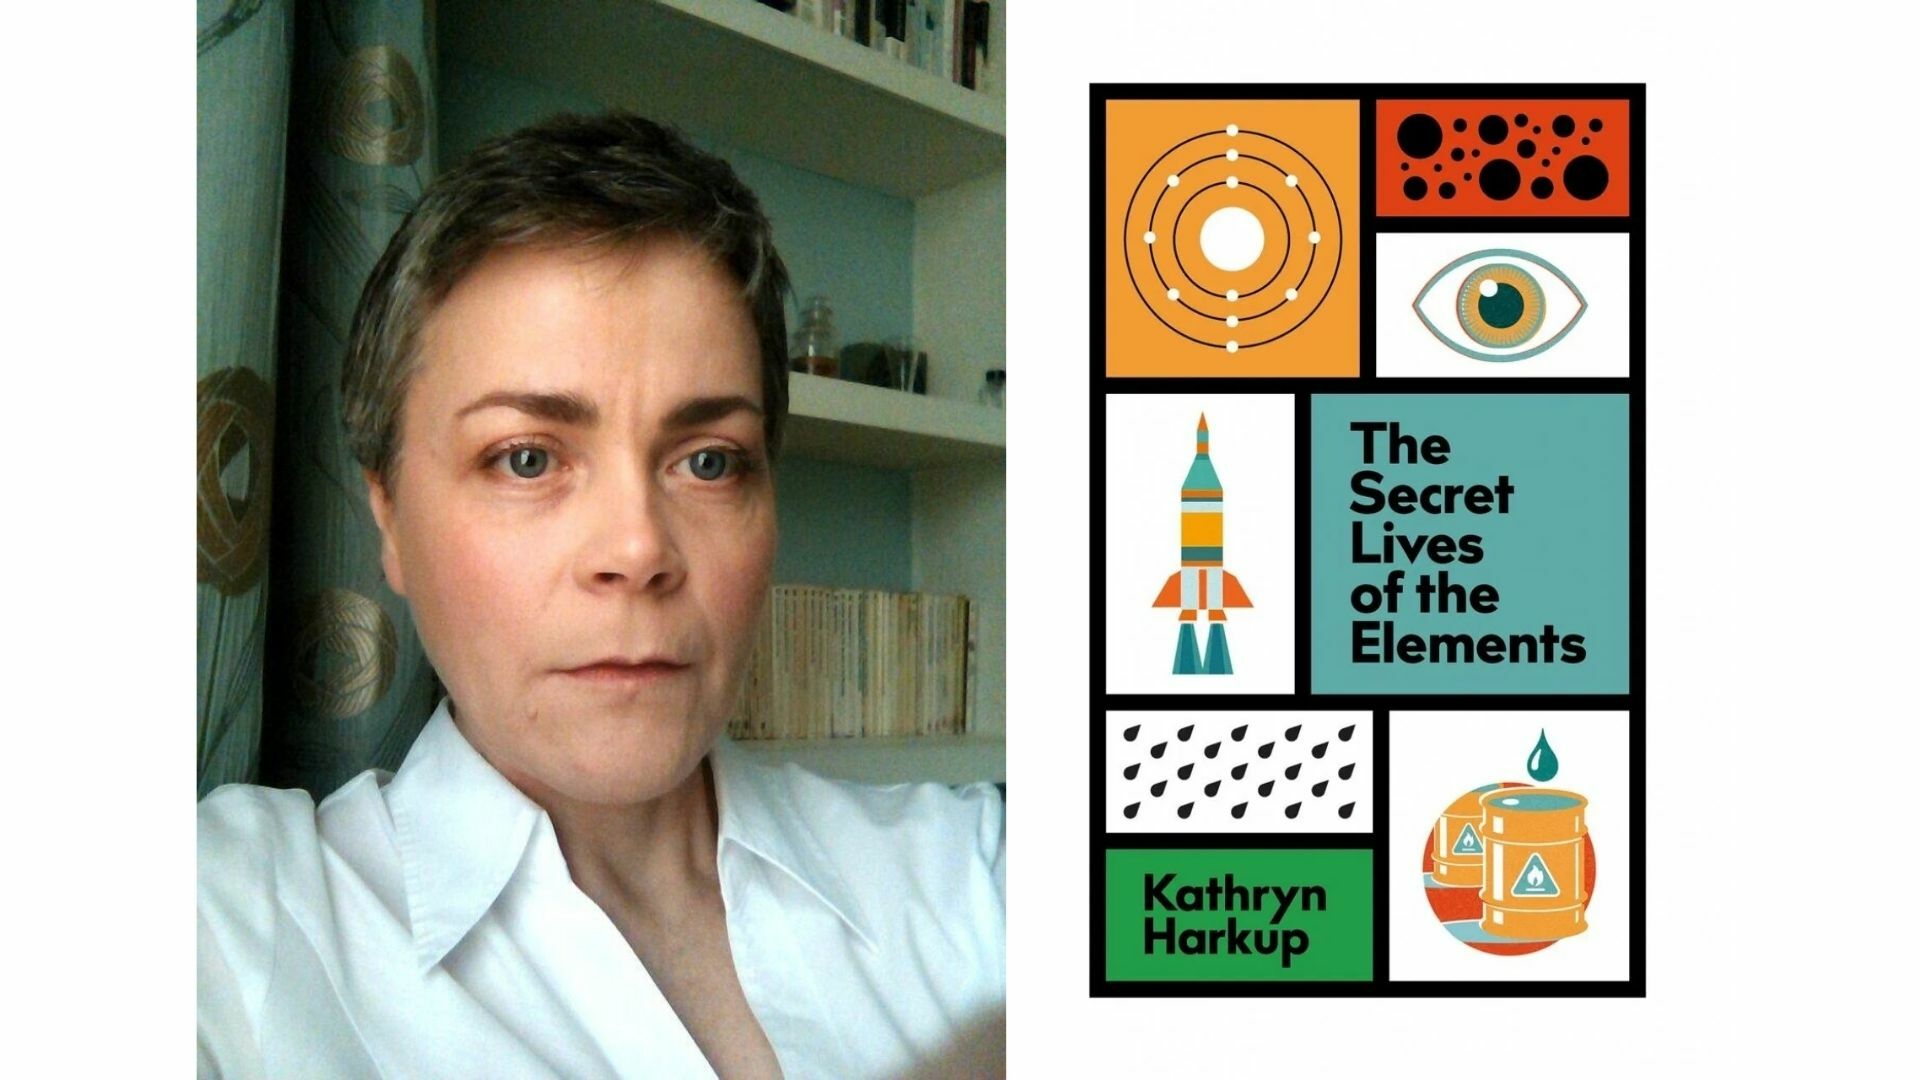 The Secret Lives of the Elements with Kathyrn Harkup